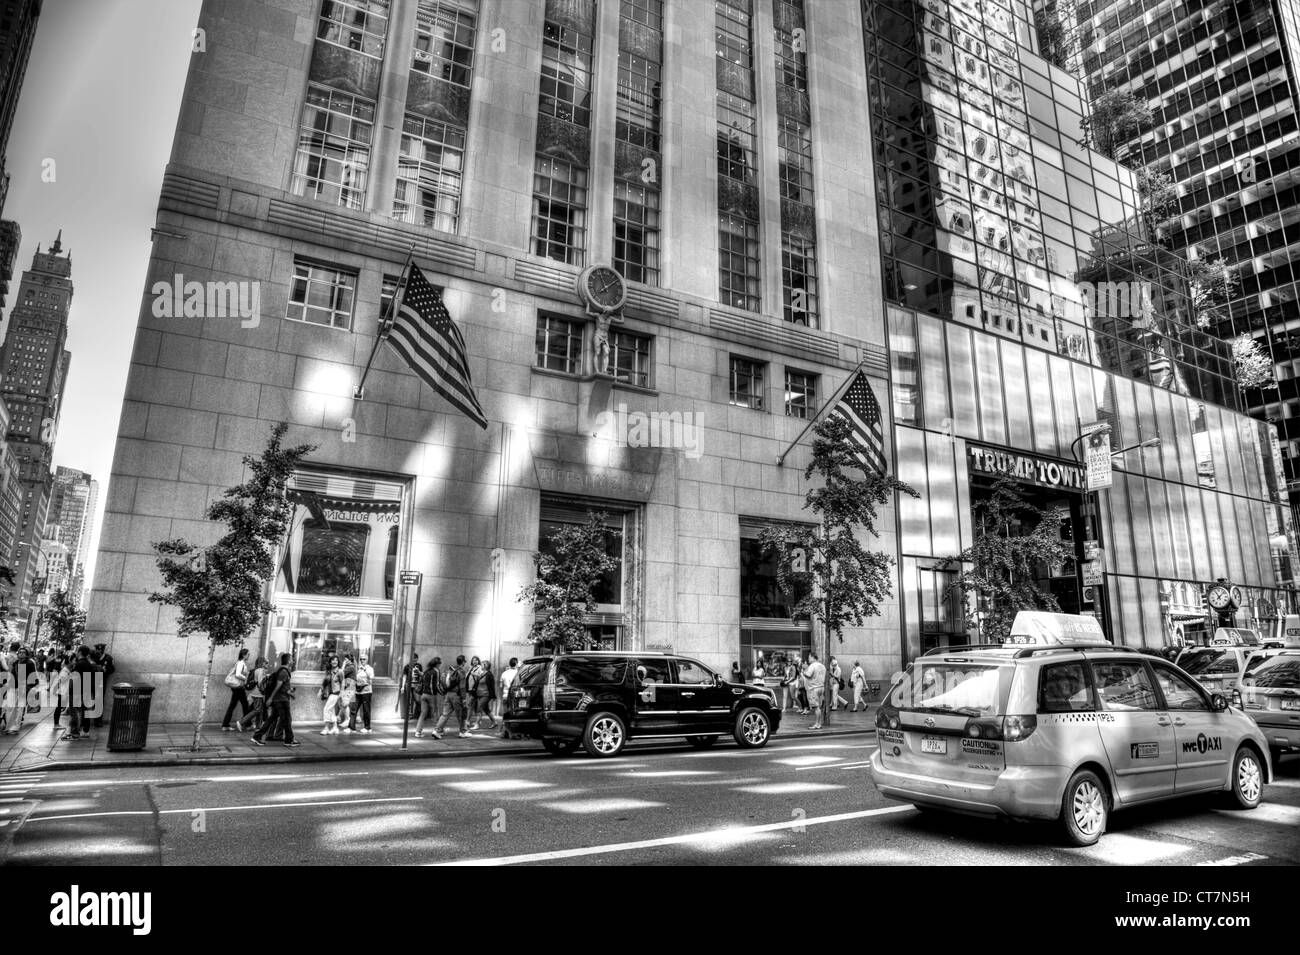 Tiffany & Co Jewelry Store in New York City Fifth Avenue location entrance & Trump Tower next door Stock Photo